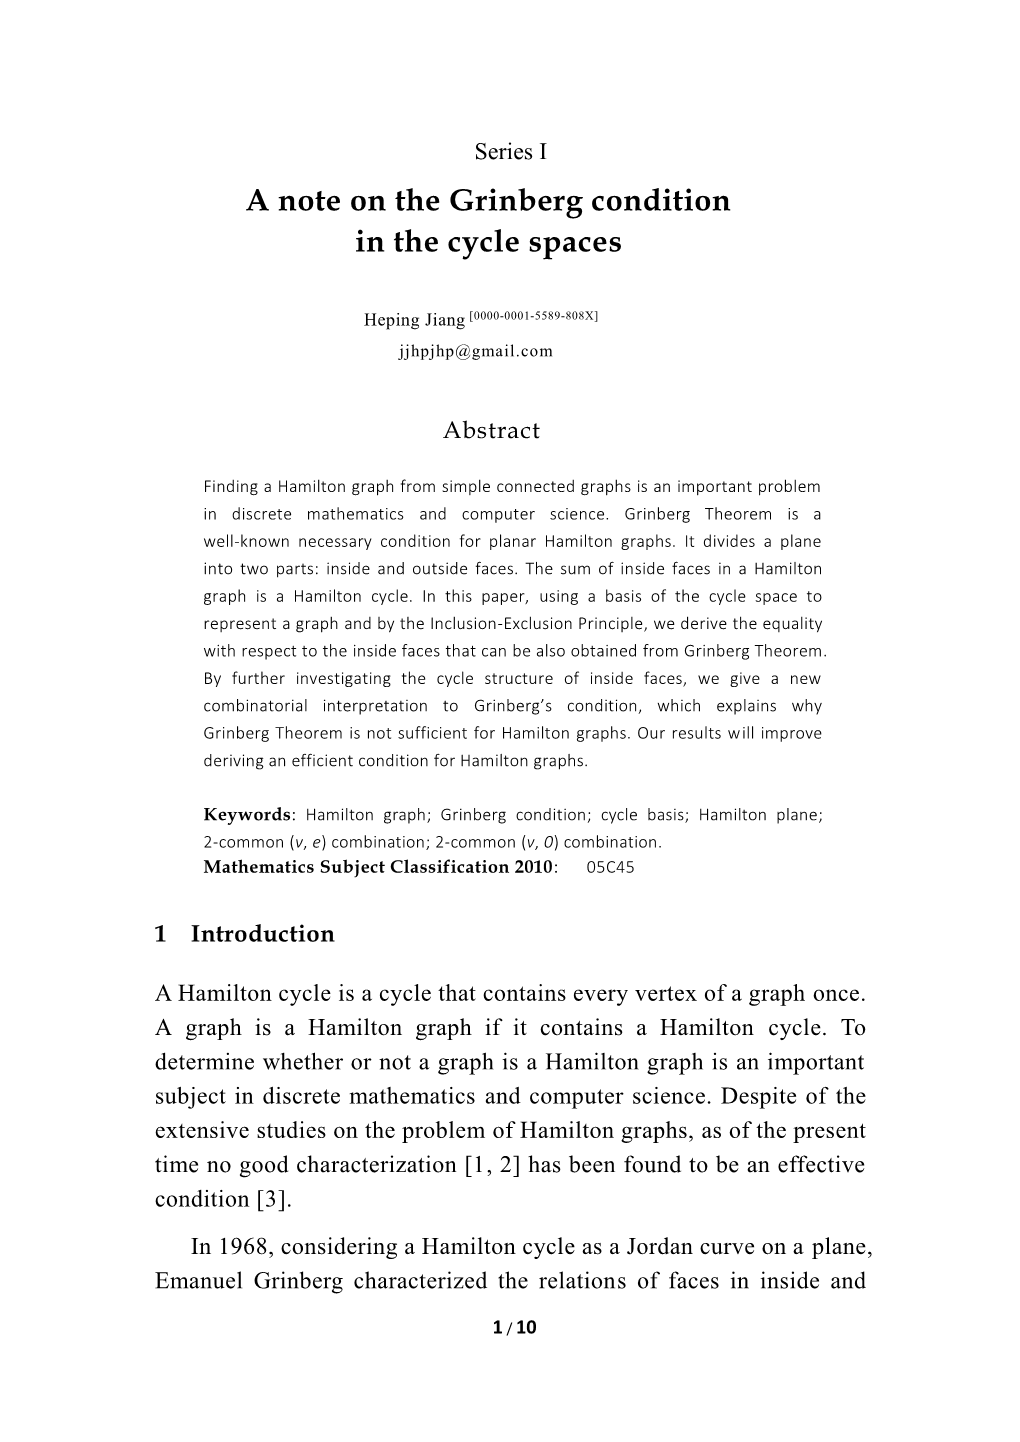 A Note on the Grinberg Condition in the Cycle Spaces